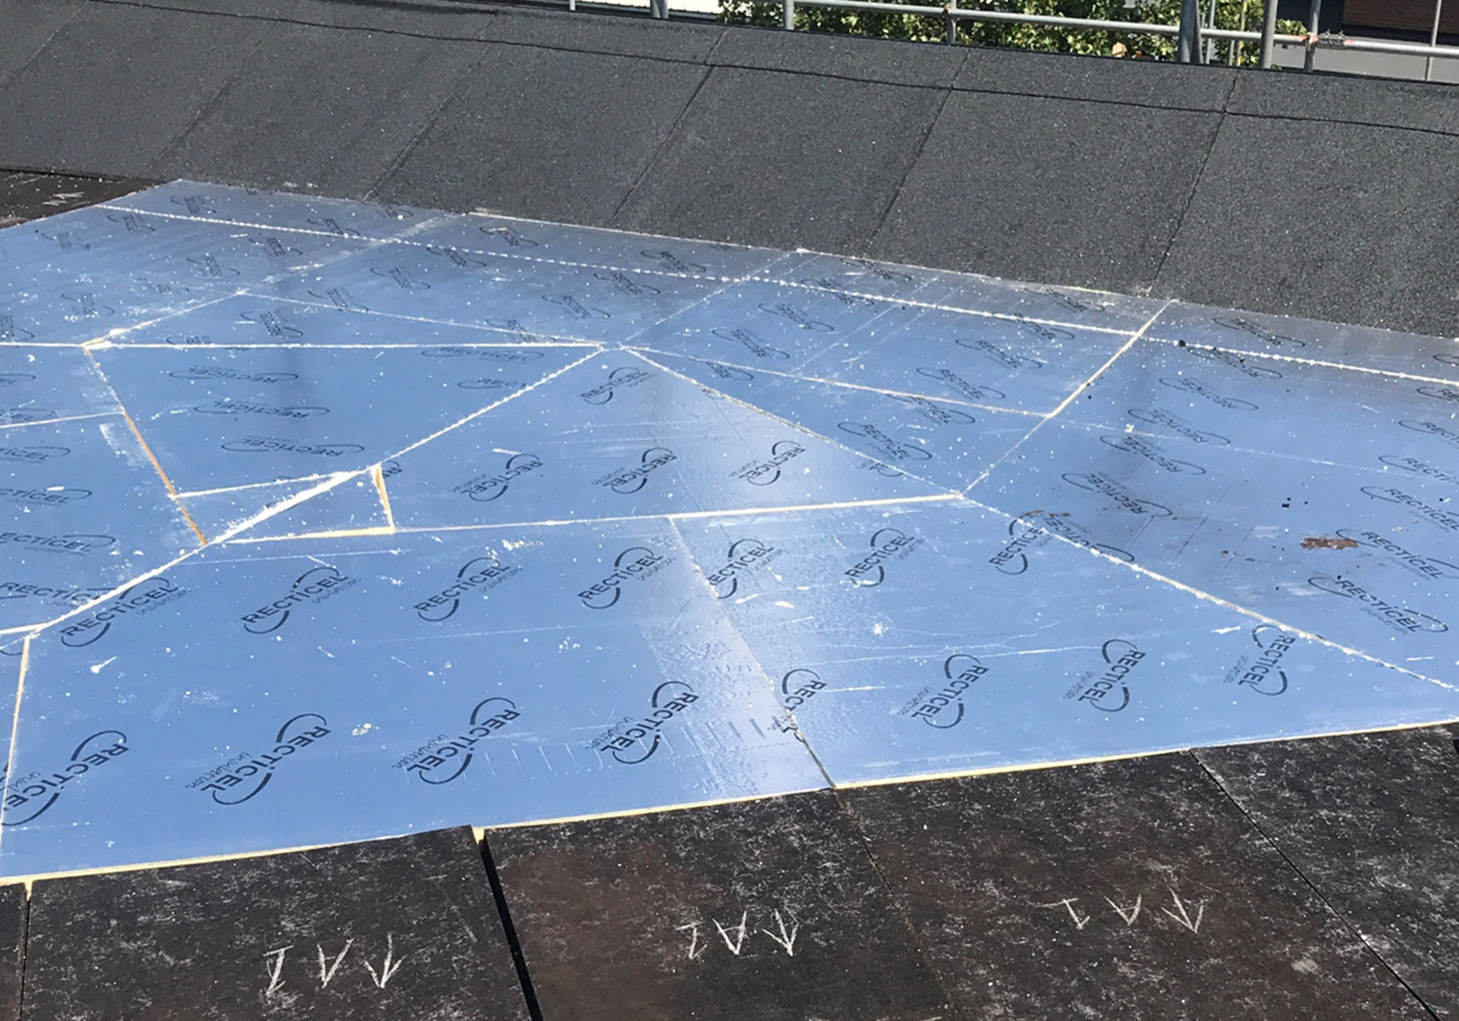 WHY IS A FLAT ROOF CRICKET RECOMMENDED FOR CHIMNEYS AND FLAT ROOFS?